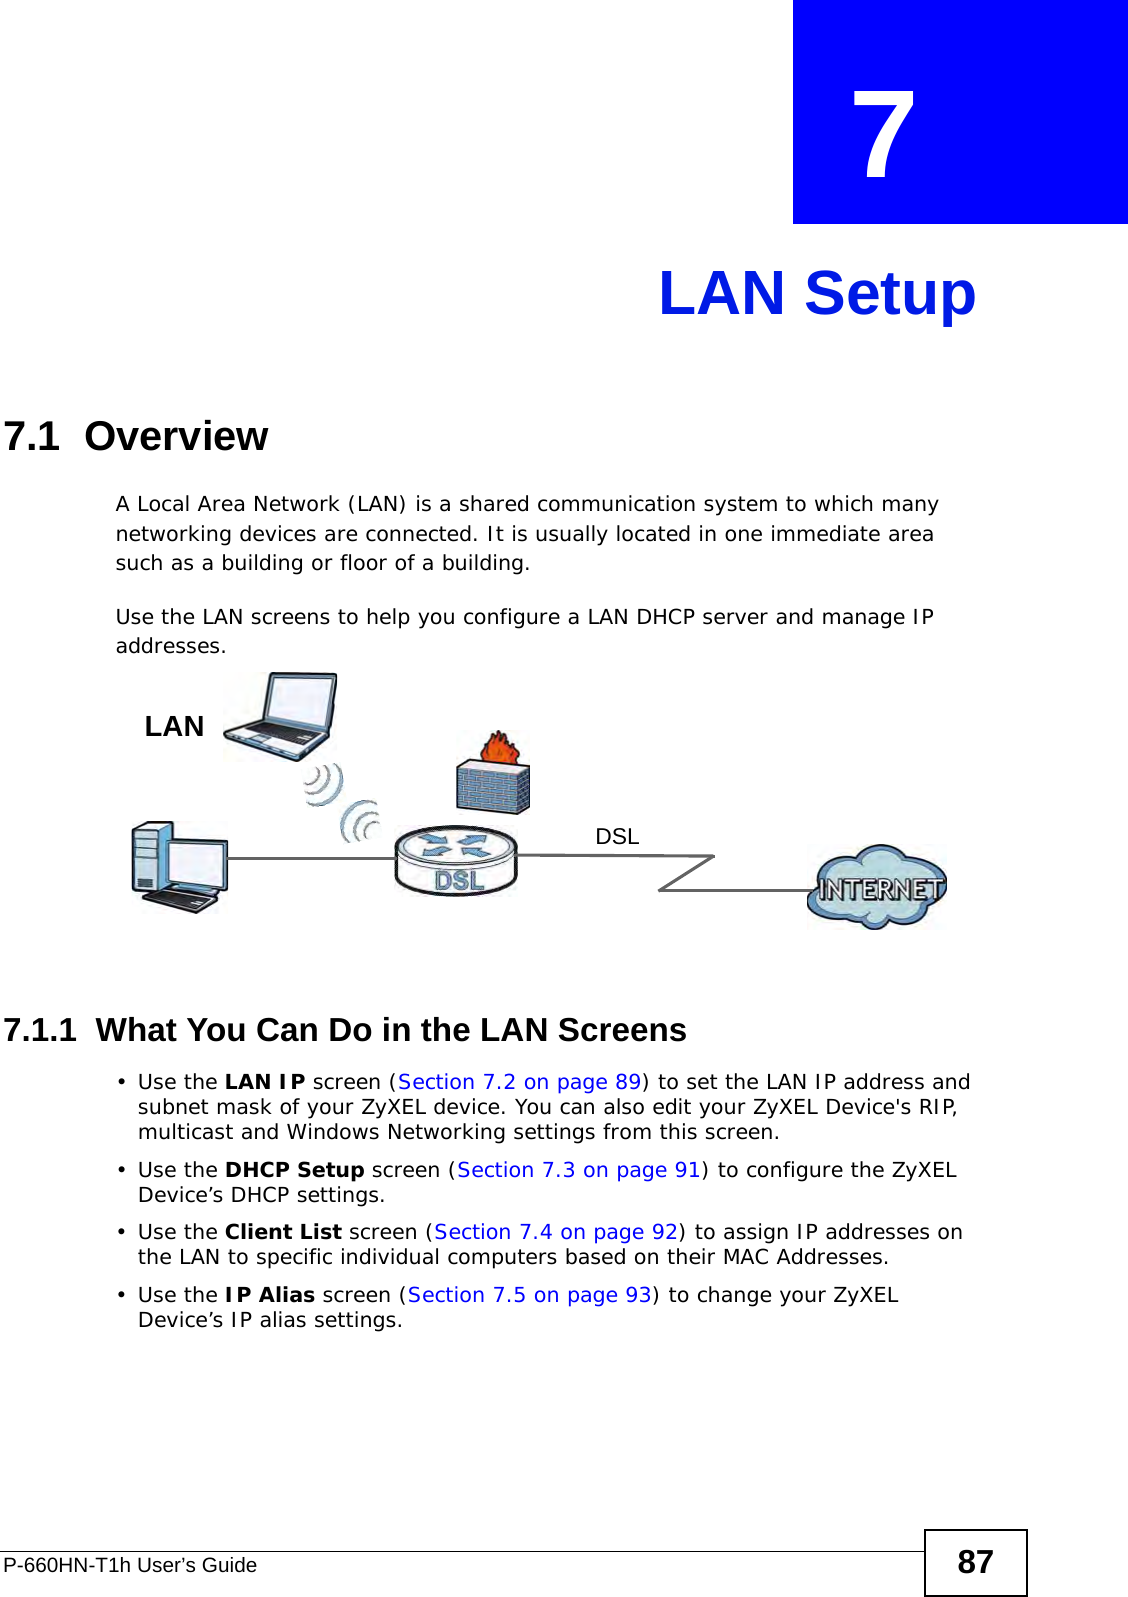 P-660HN-T1h User’s Guide 87CHAPTER  7 LAN Setup7.1  OverviewA Local Area Network (LAN) is a shared communication system to which many networking devices are connected. It is usually located in one immediate area such as a building or floor of a building.Use the LAN screens to help you configure a LAN DHCP server and manage IP addresses.7.1.1  What You Can Do in the LAN Screens•Use the LAN IP screen (Section 7.2 on page 89) to set the LAN IP address and subnet mask of your ZyXEL device. You can also edit your ZyXEL Device&apos;s RIP, multicast and Windows Networking settings from this screen.•Use the DHCP Setup screen (Section 7.3 on page 91) to configure the ZyXEL Device’s DHCP settings.•Use the Client List screen (Section 7.4 on page 92) to assign IP addresses on the LAN to specific individual computers based on their MAC Addresses. •Use the IP Alias screen (Section 7.5 on page 93) to change your ZyXEL Device’s IP alias settings.DSLLAN